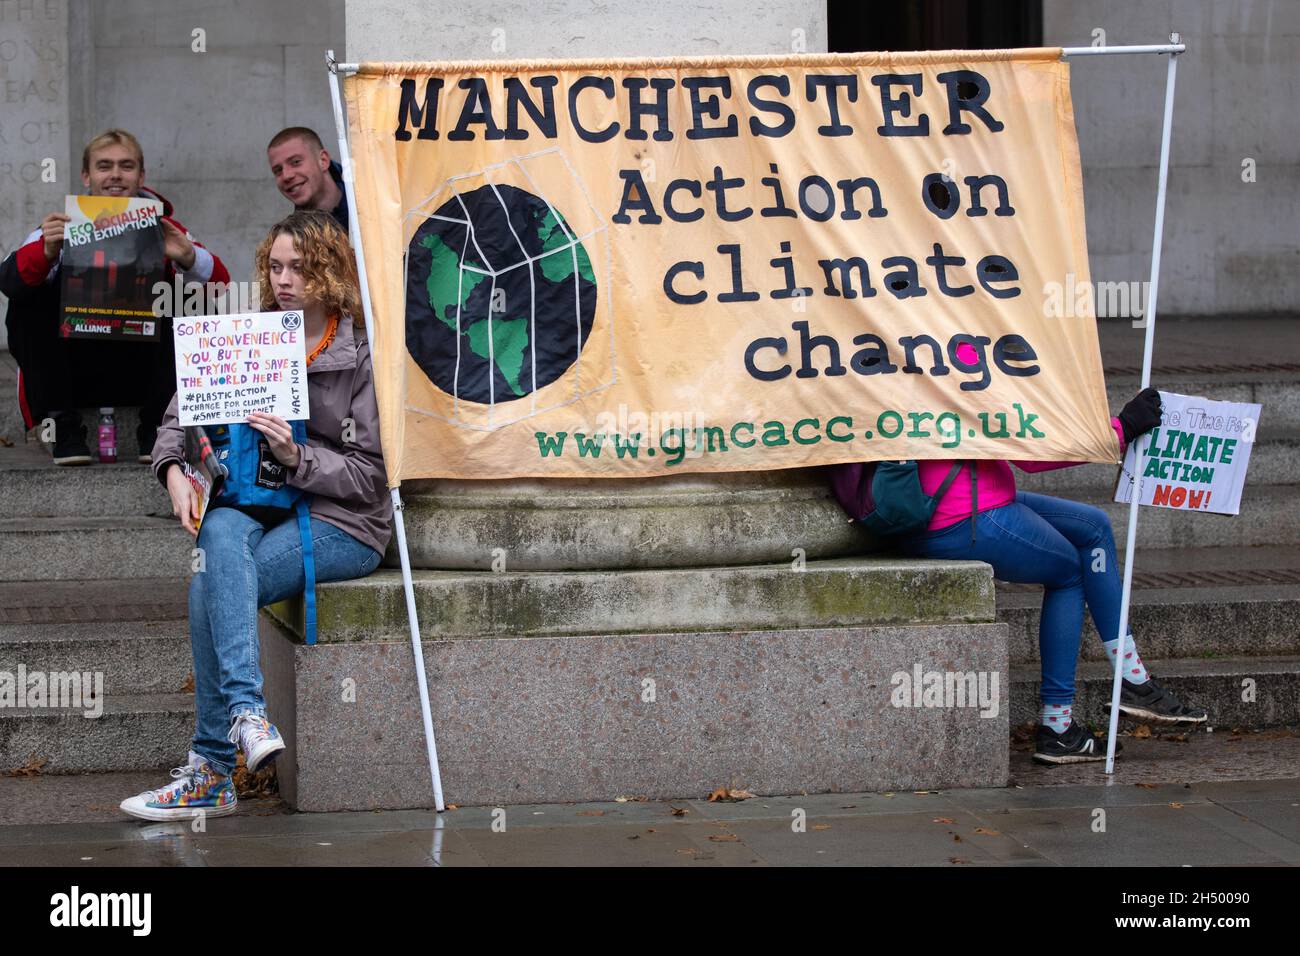 Youth Climate Strike. St Peter's Square , Manchester, United Kingdom. The protest was held at  St Peters square( the site of the Peterloo massacre in 1819 which saw industrial workers protest during the industrial revolution). Young people gathered to Protest across the world to demand a radical action on climate change and climate justice. Days of protest are planned across Manchester and around the globe during COP 26 being held in Glasgow UK . Climate change is already destroying the lives of millions of people. 2021 has seen floods and hurricanes to some of the biggest wildfires in history Stock Photo